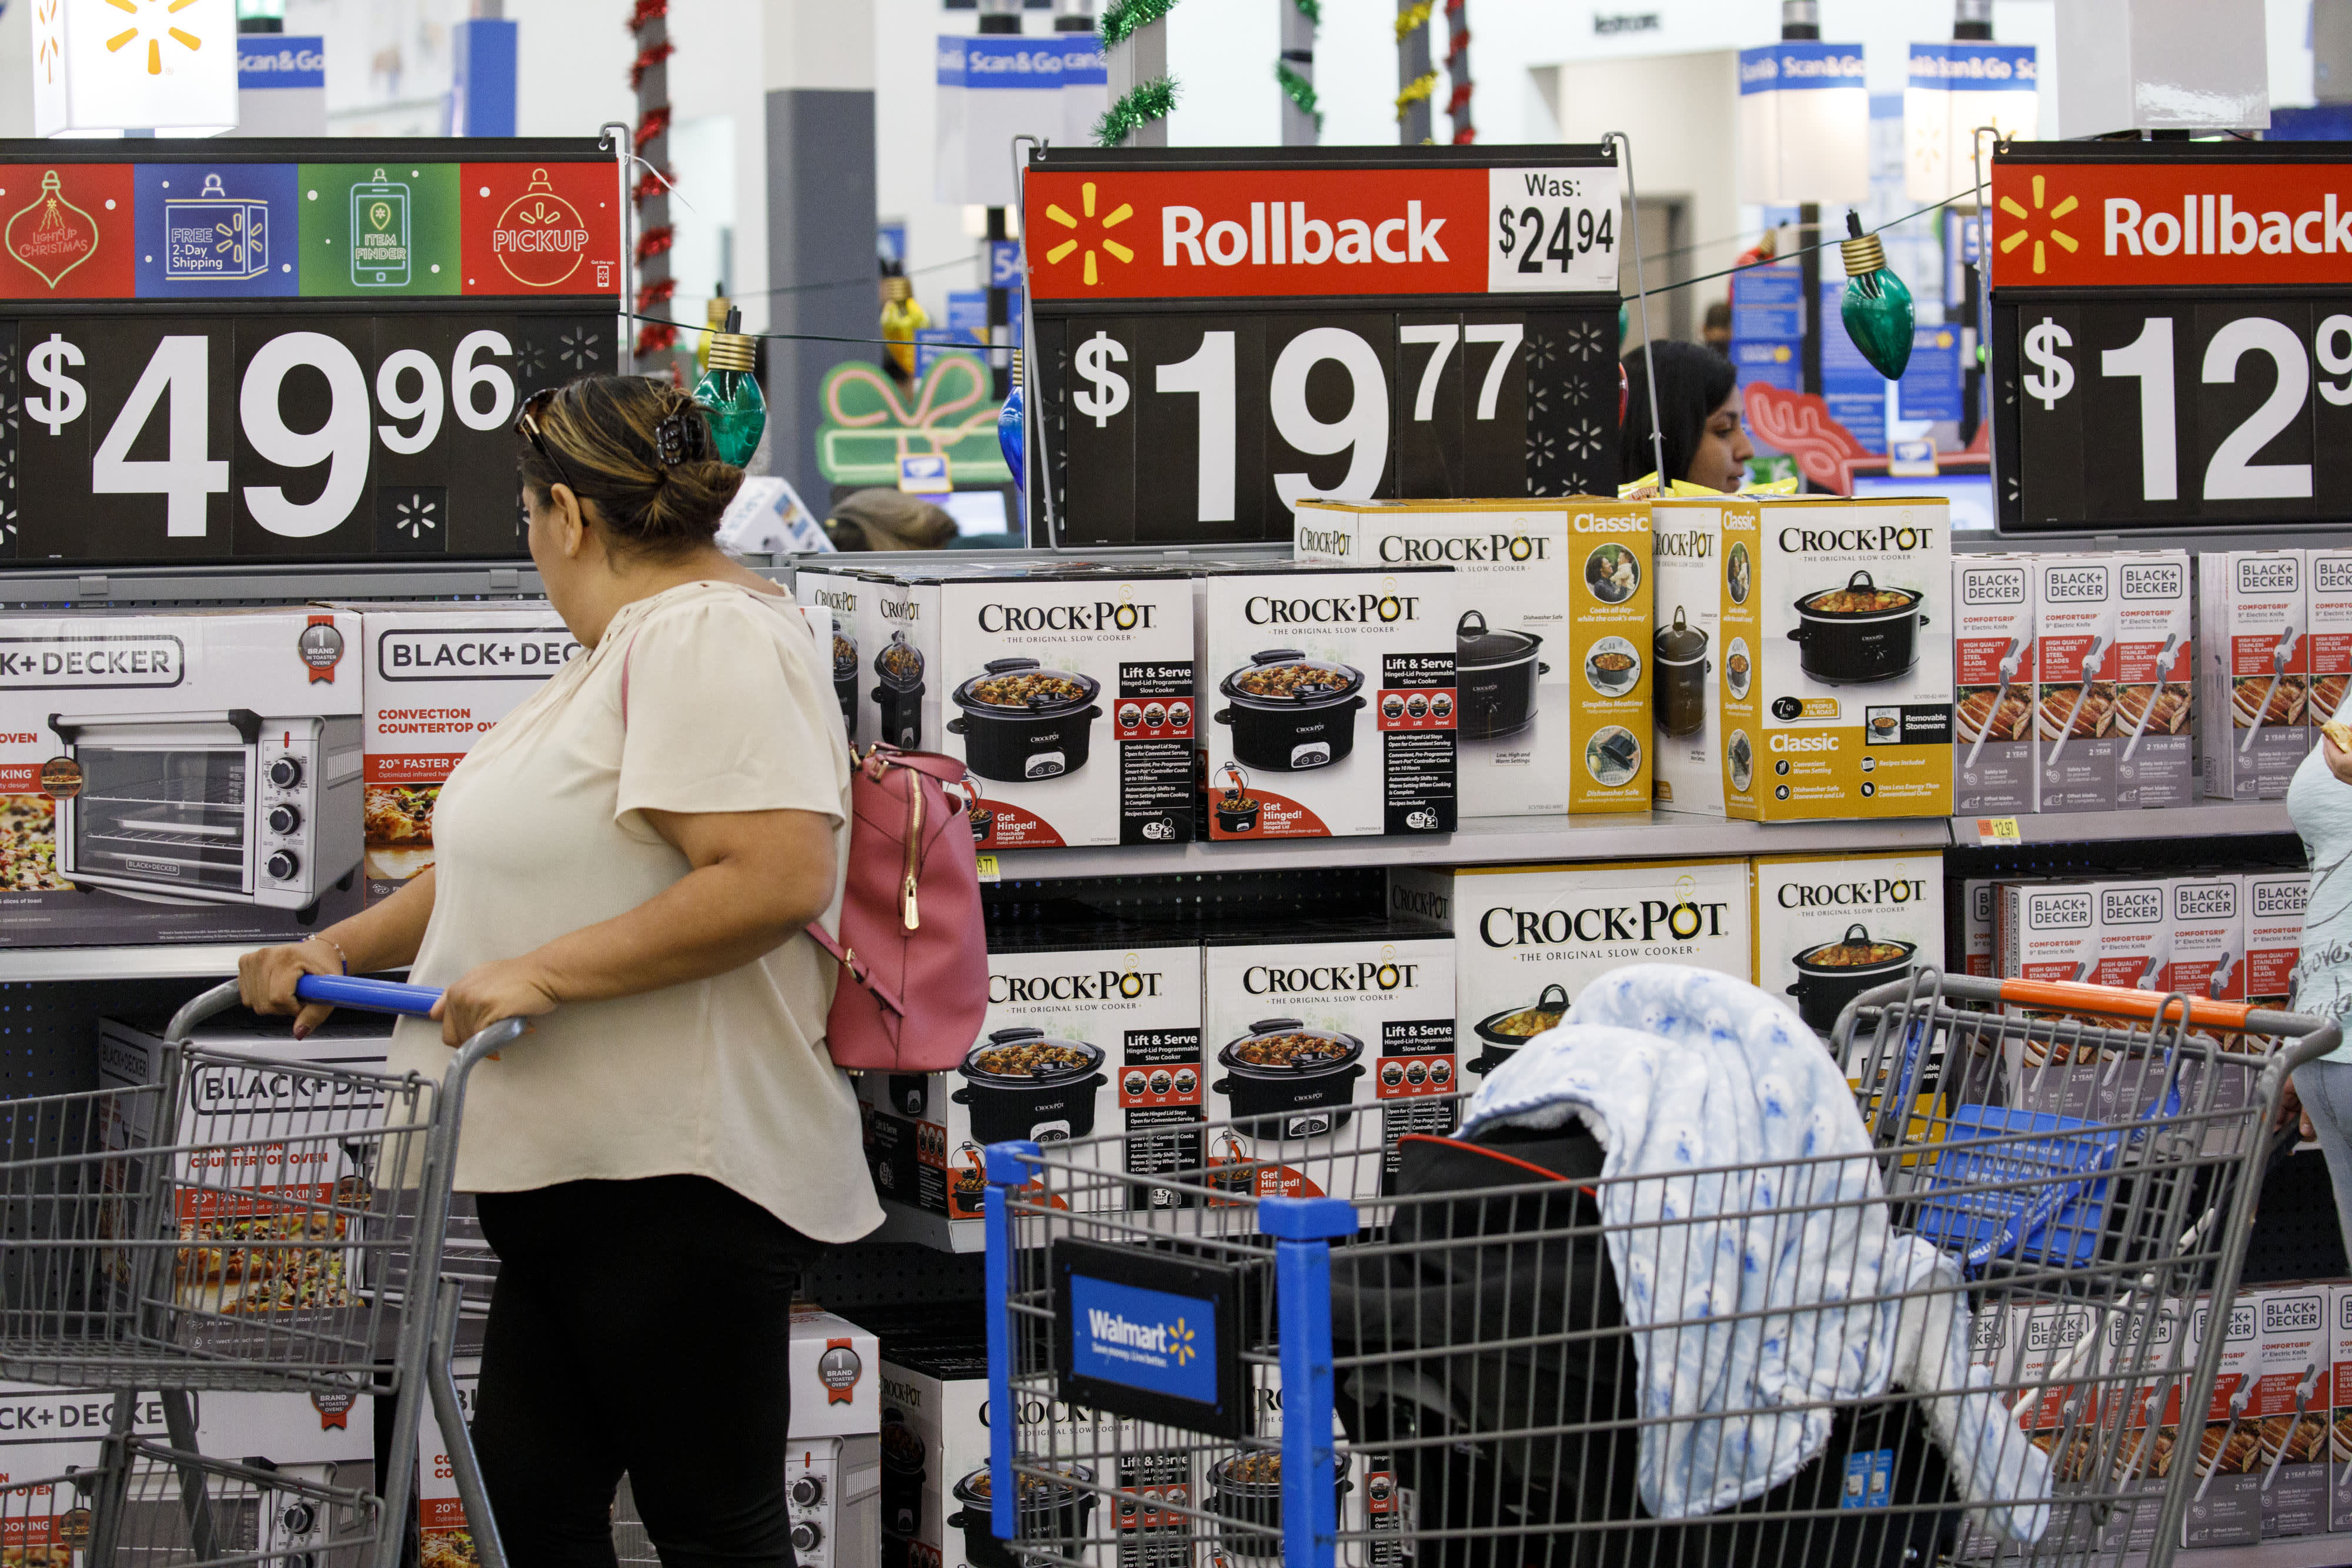 Walmart is doubling down on ‘rollbacks’ as inflation pushes prices higher